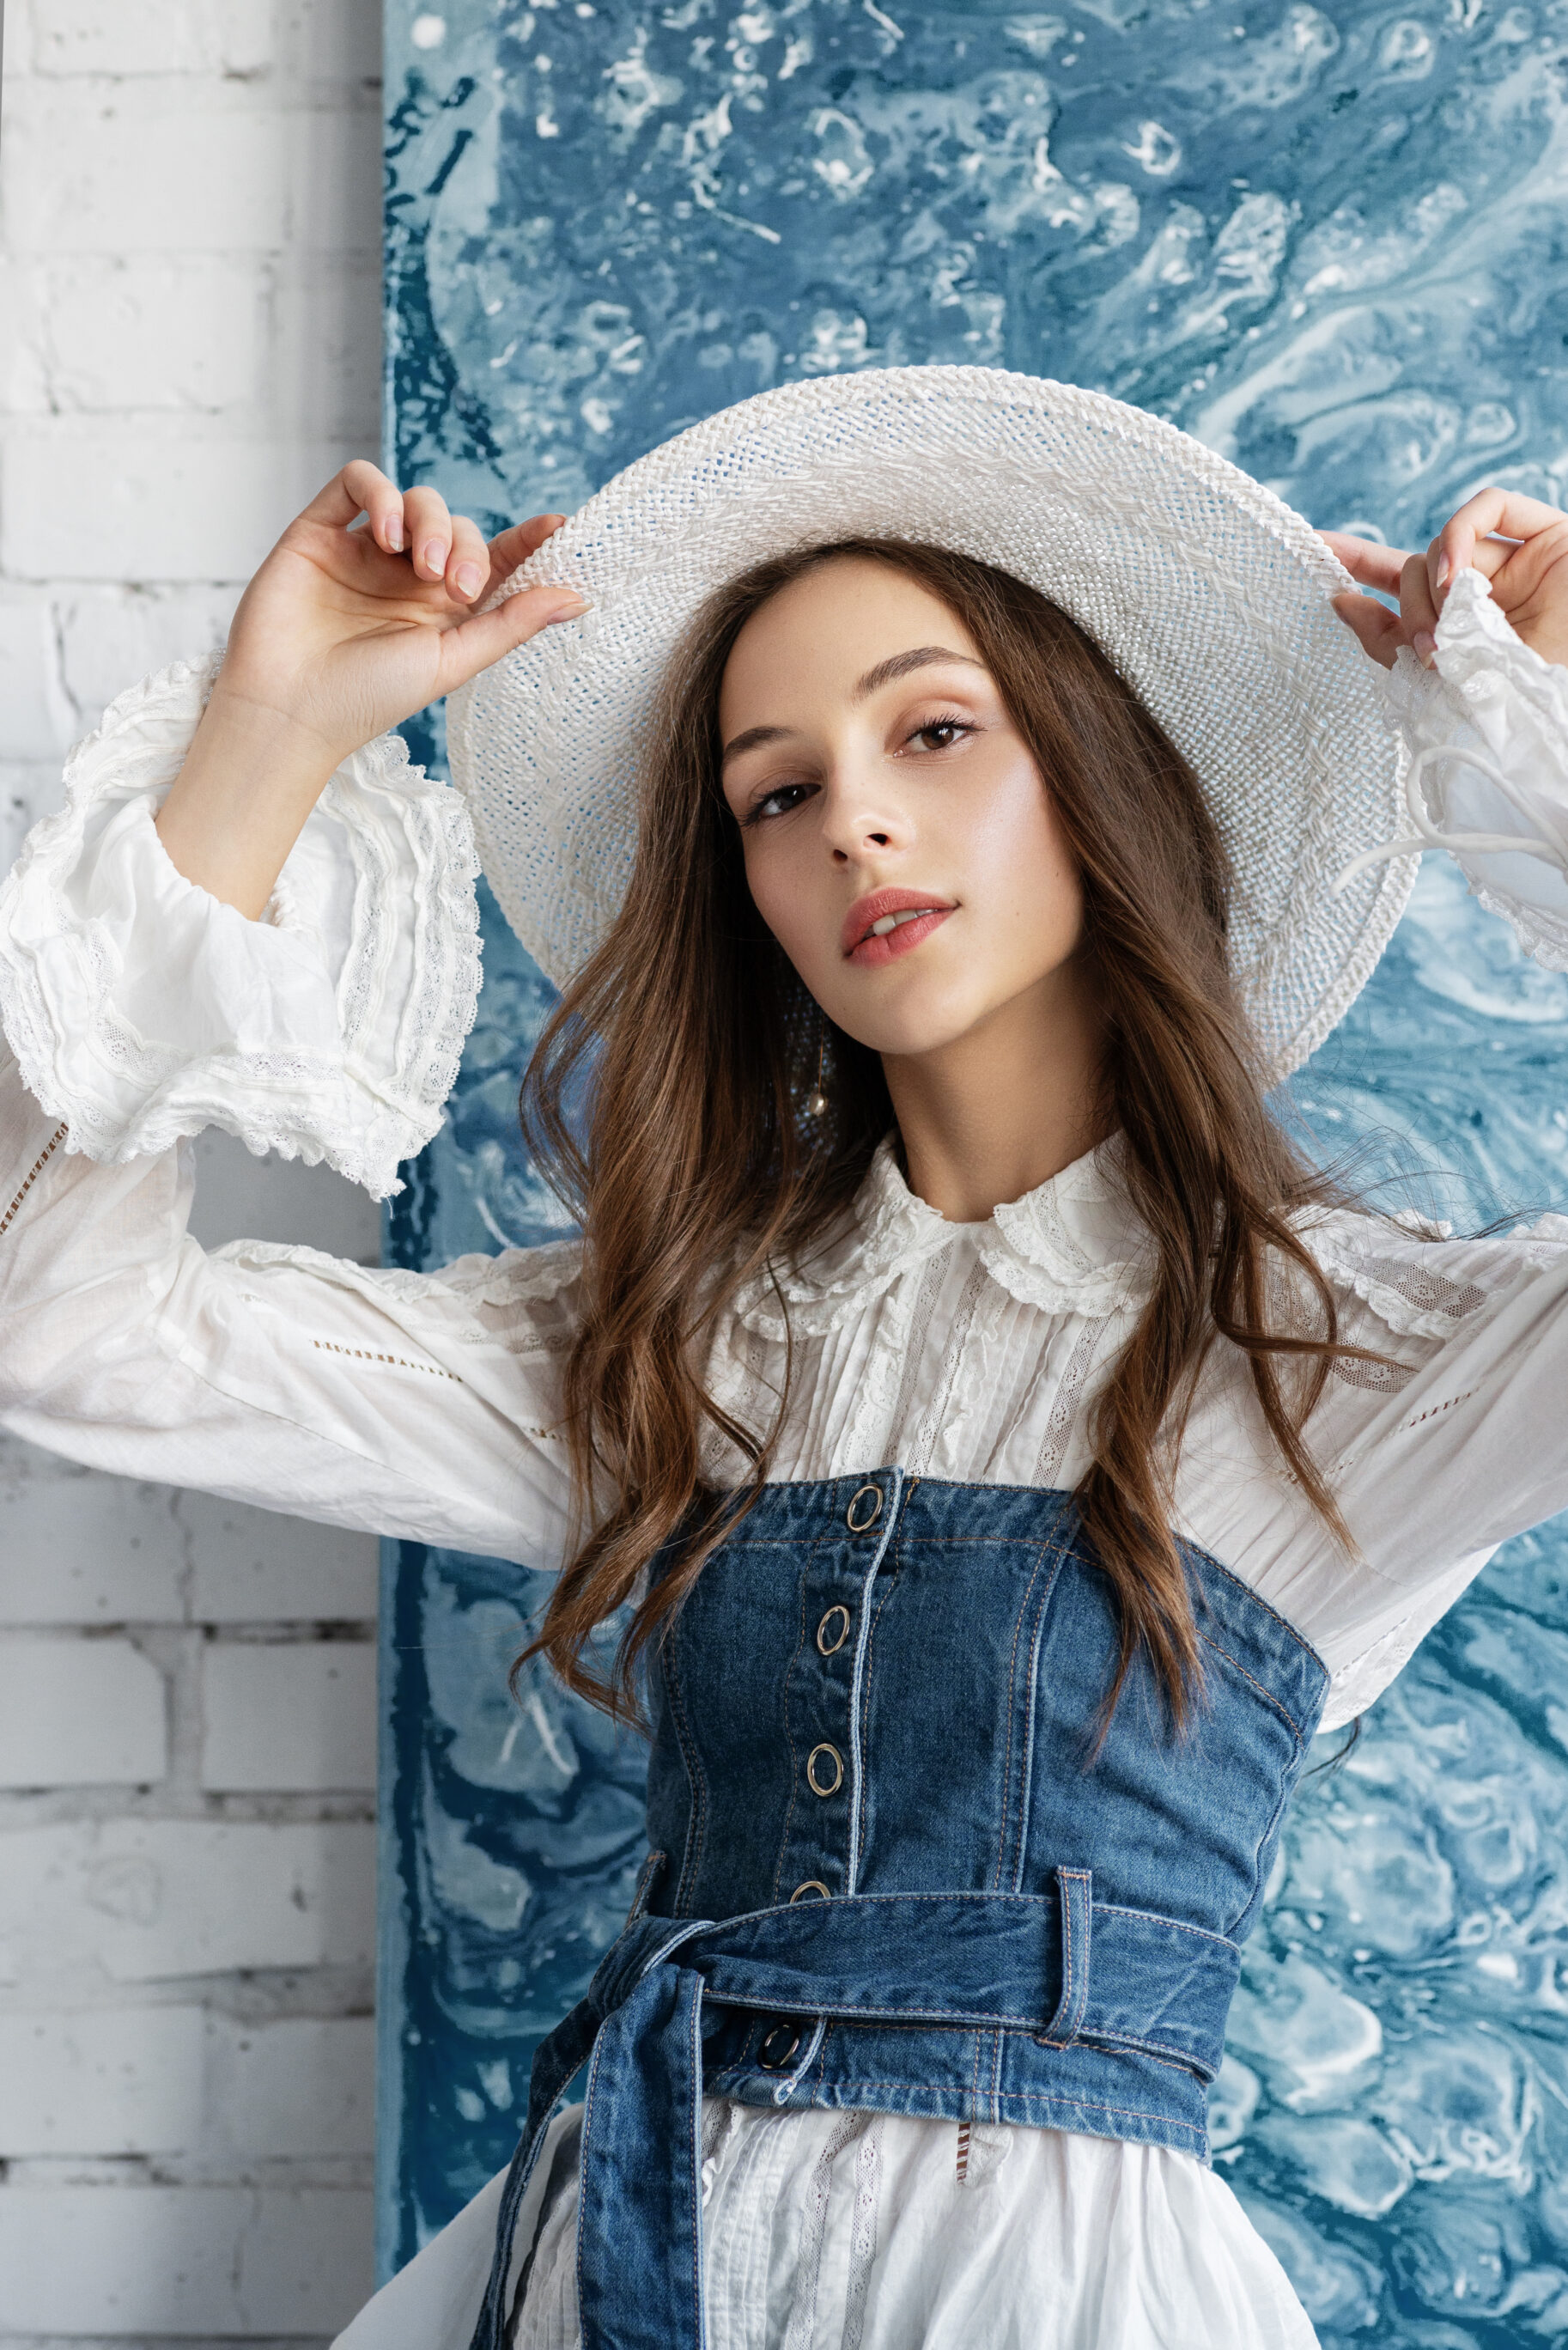 Wicker Hat, Vintage Style White Blouse, and Denim Corset